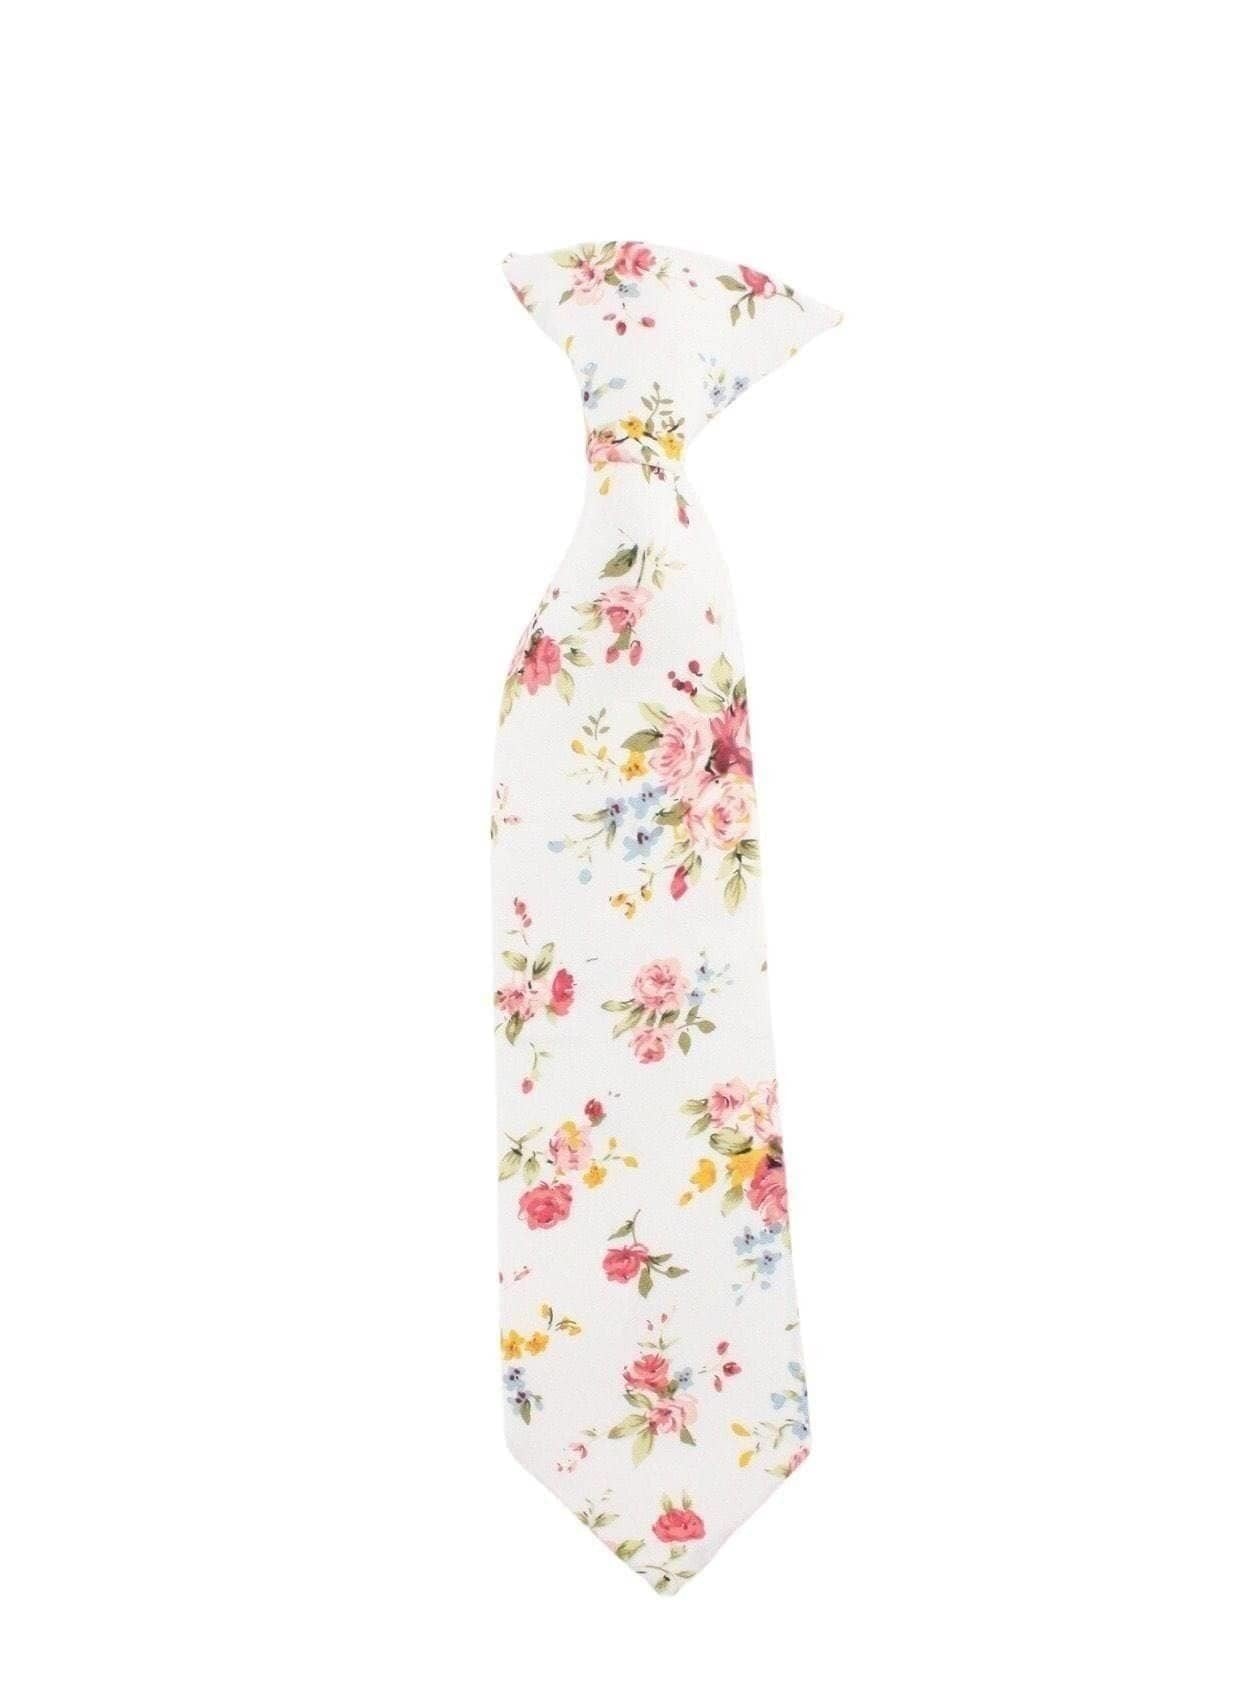 Boys White and Pink Floral Clip On Tie BENJAMIN MYTIESHOP-Boys White and Pink Floral Clip On Tie Material:Cotton Blend Approx Size: Max width: 6.5 cm / 2.4 inches 9-24 months 26 CM2-5 years 31 CM9-11 Years 43 CM Base Color: White Great for: Ring Bearers Weddings Photos-Mytieshop